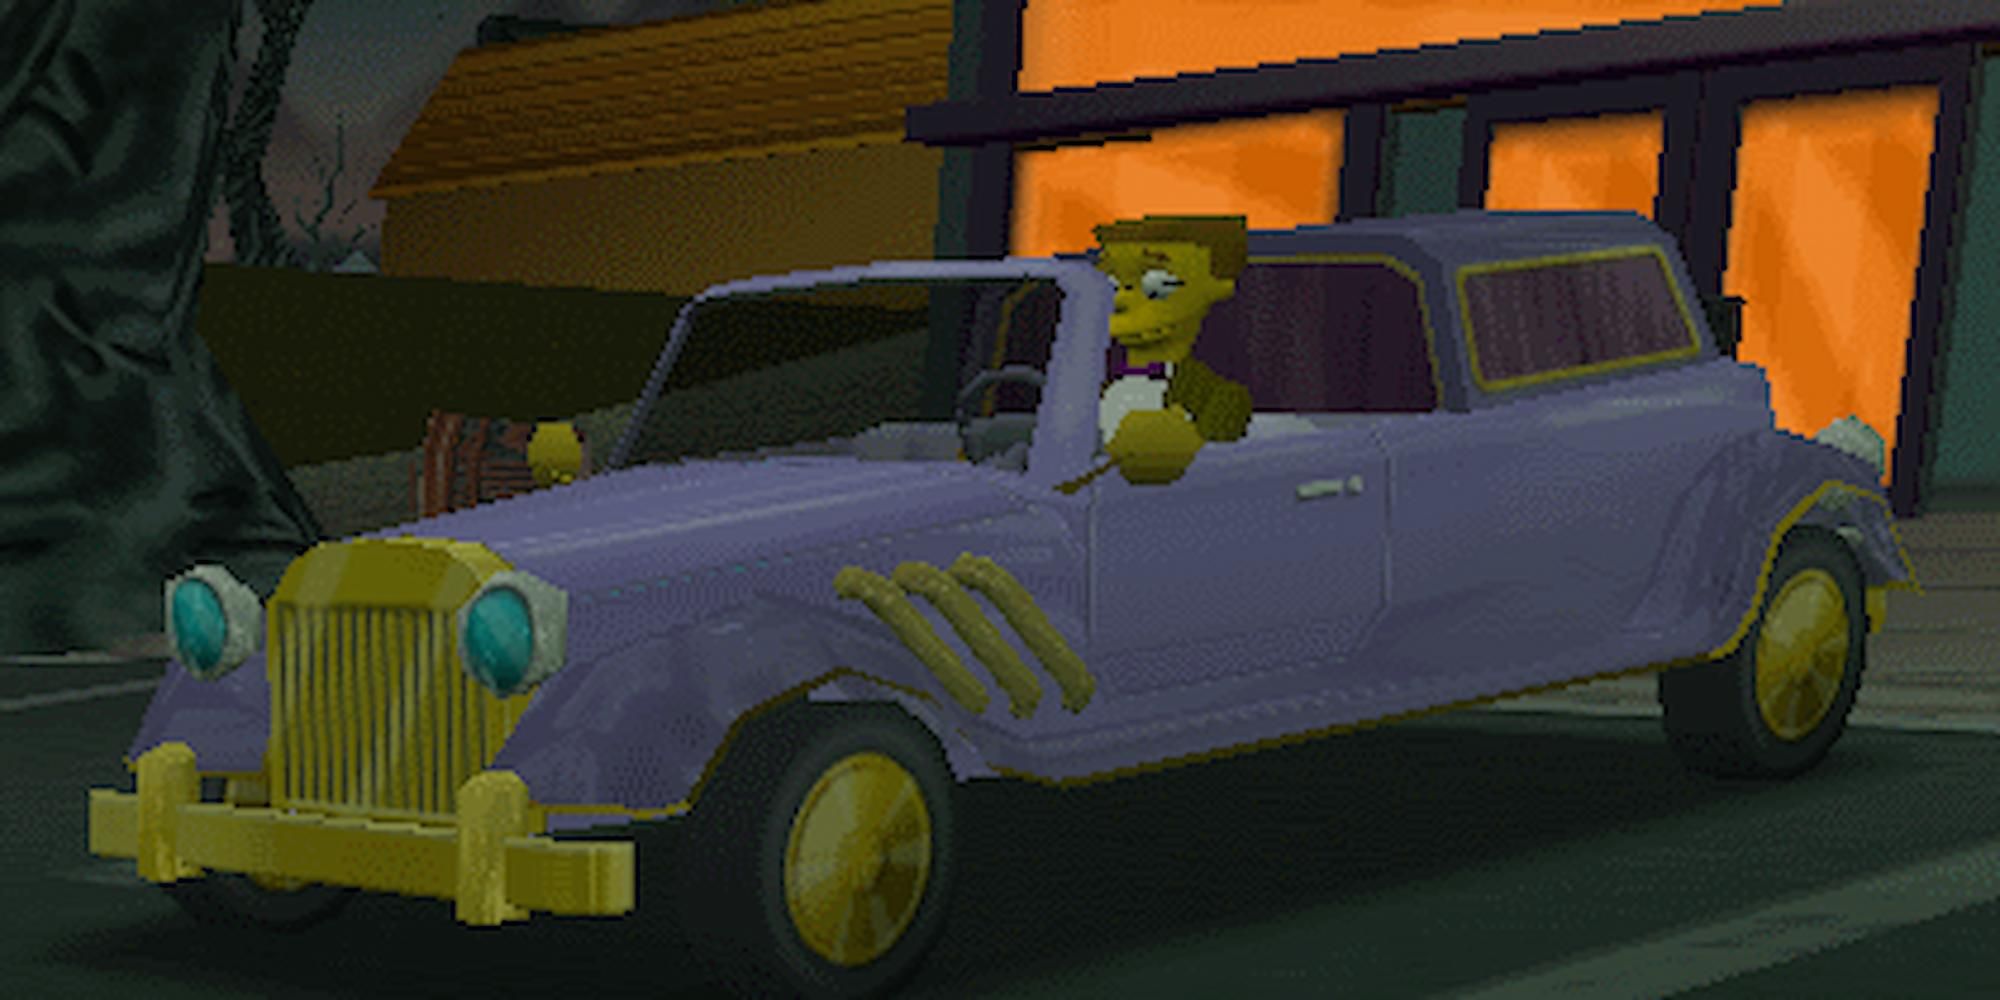 Smithers sitting in Mr. Burns Limo